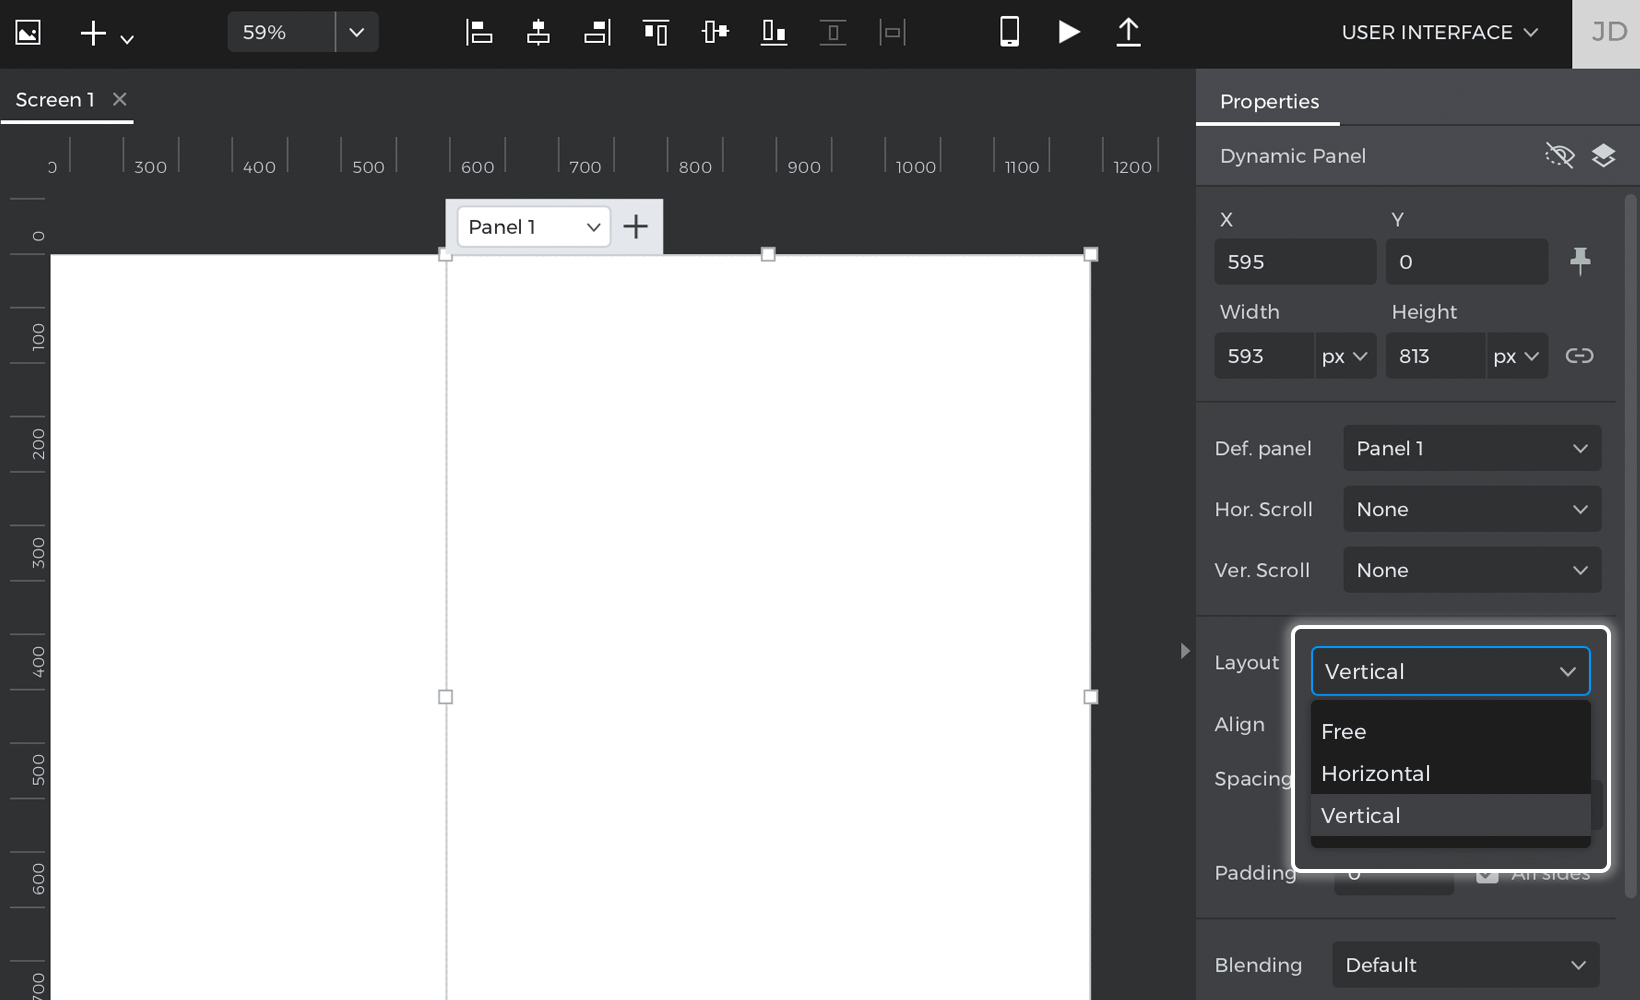 Change the panel to a vertical layout in the properties palette